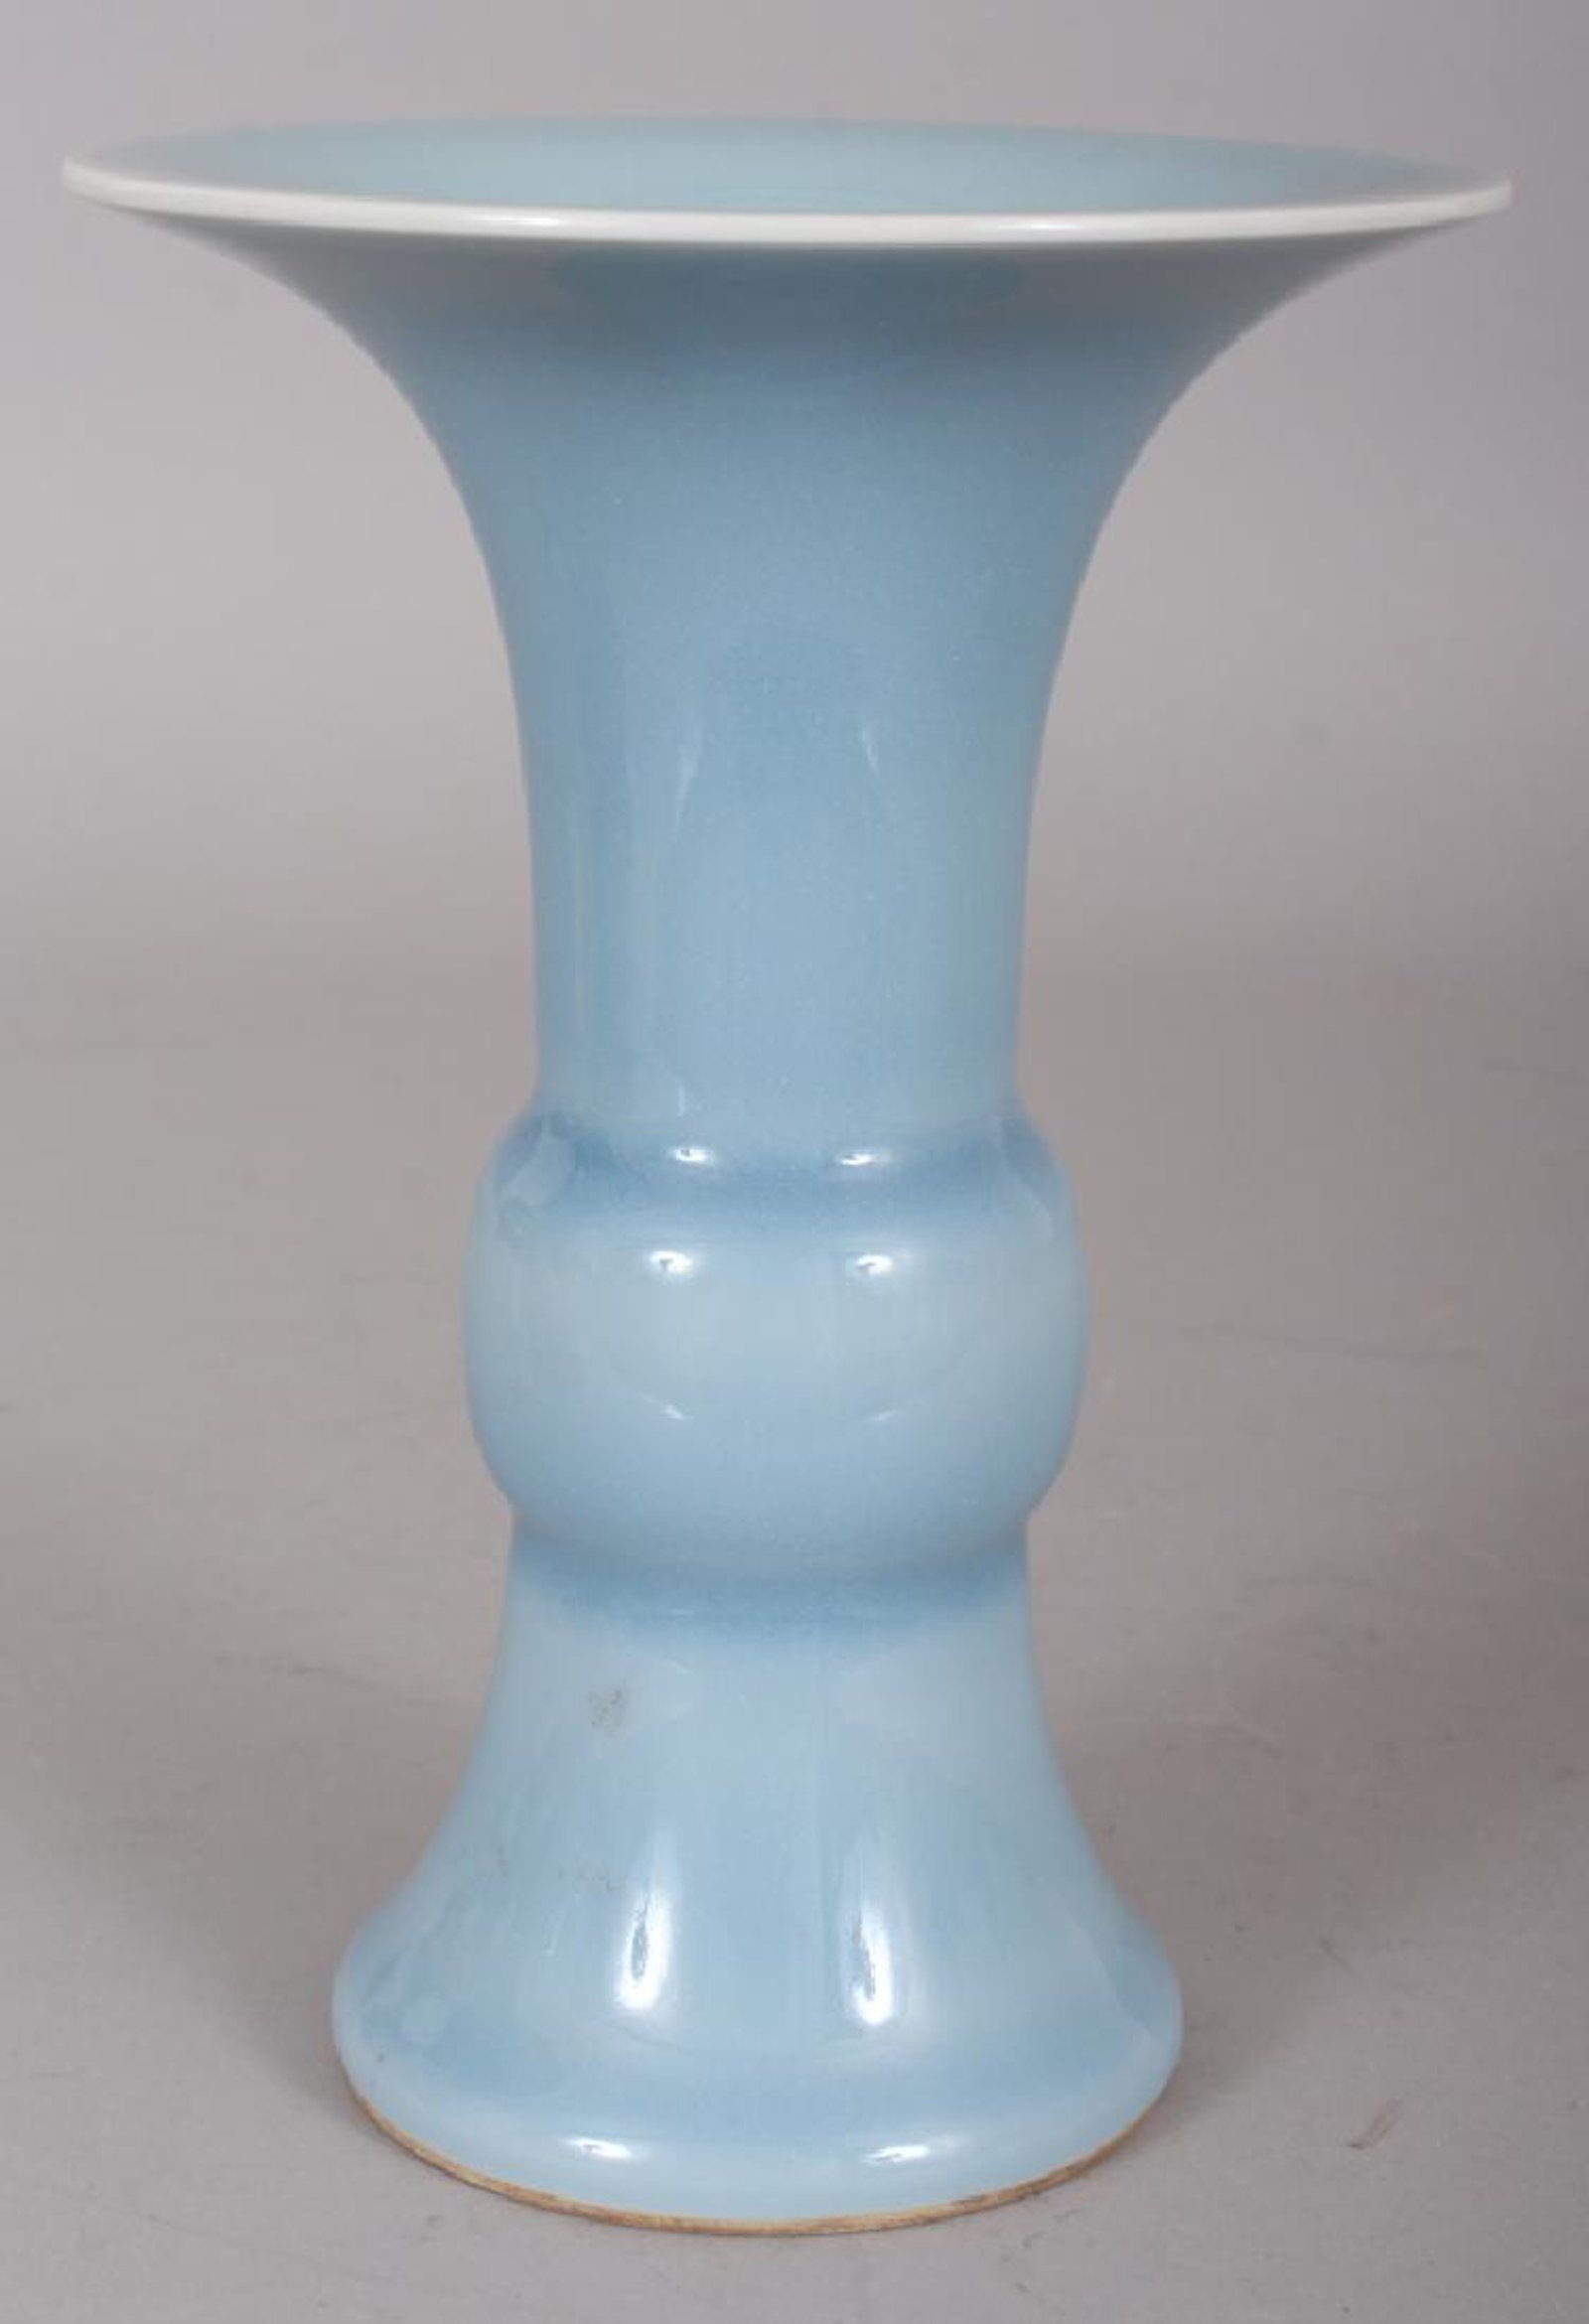 11 Unique Chinese Rosewood Vase Stands 2024 free download chinese rosewood vase stands of a chinese claire de lune porcelain gu vase with a on chinese regarding chinese claire de lune porcelain gu vase with a flaring rim the